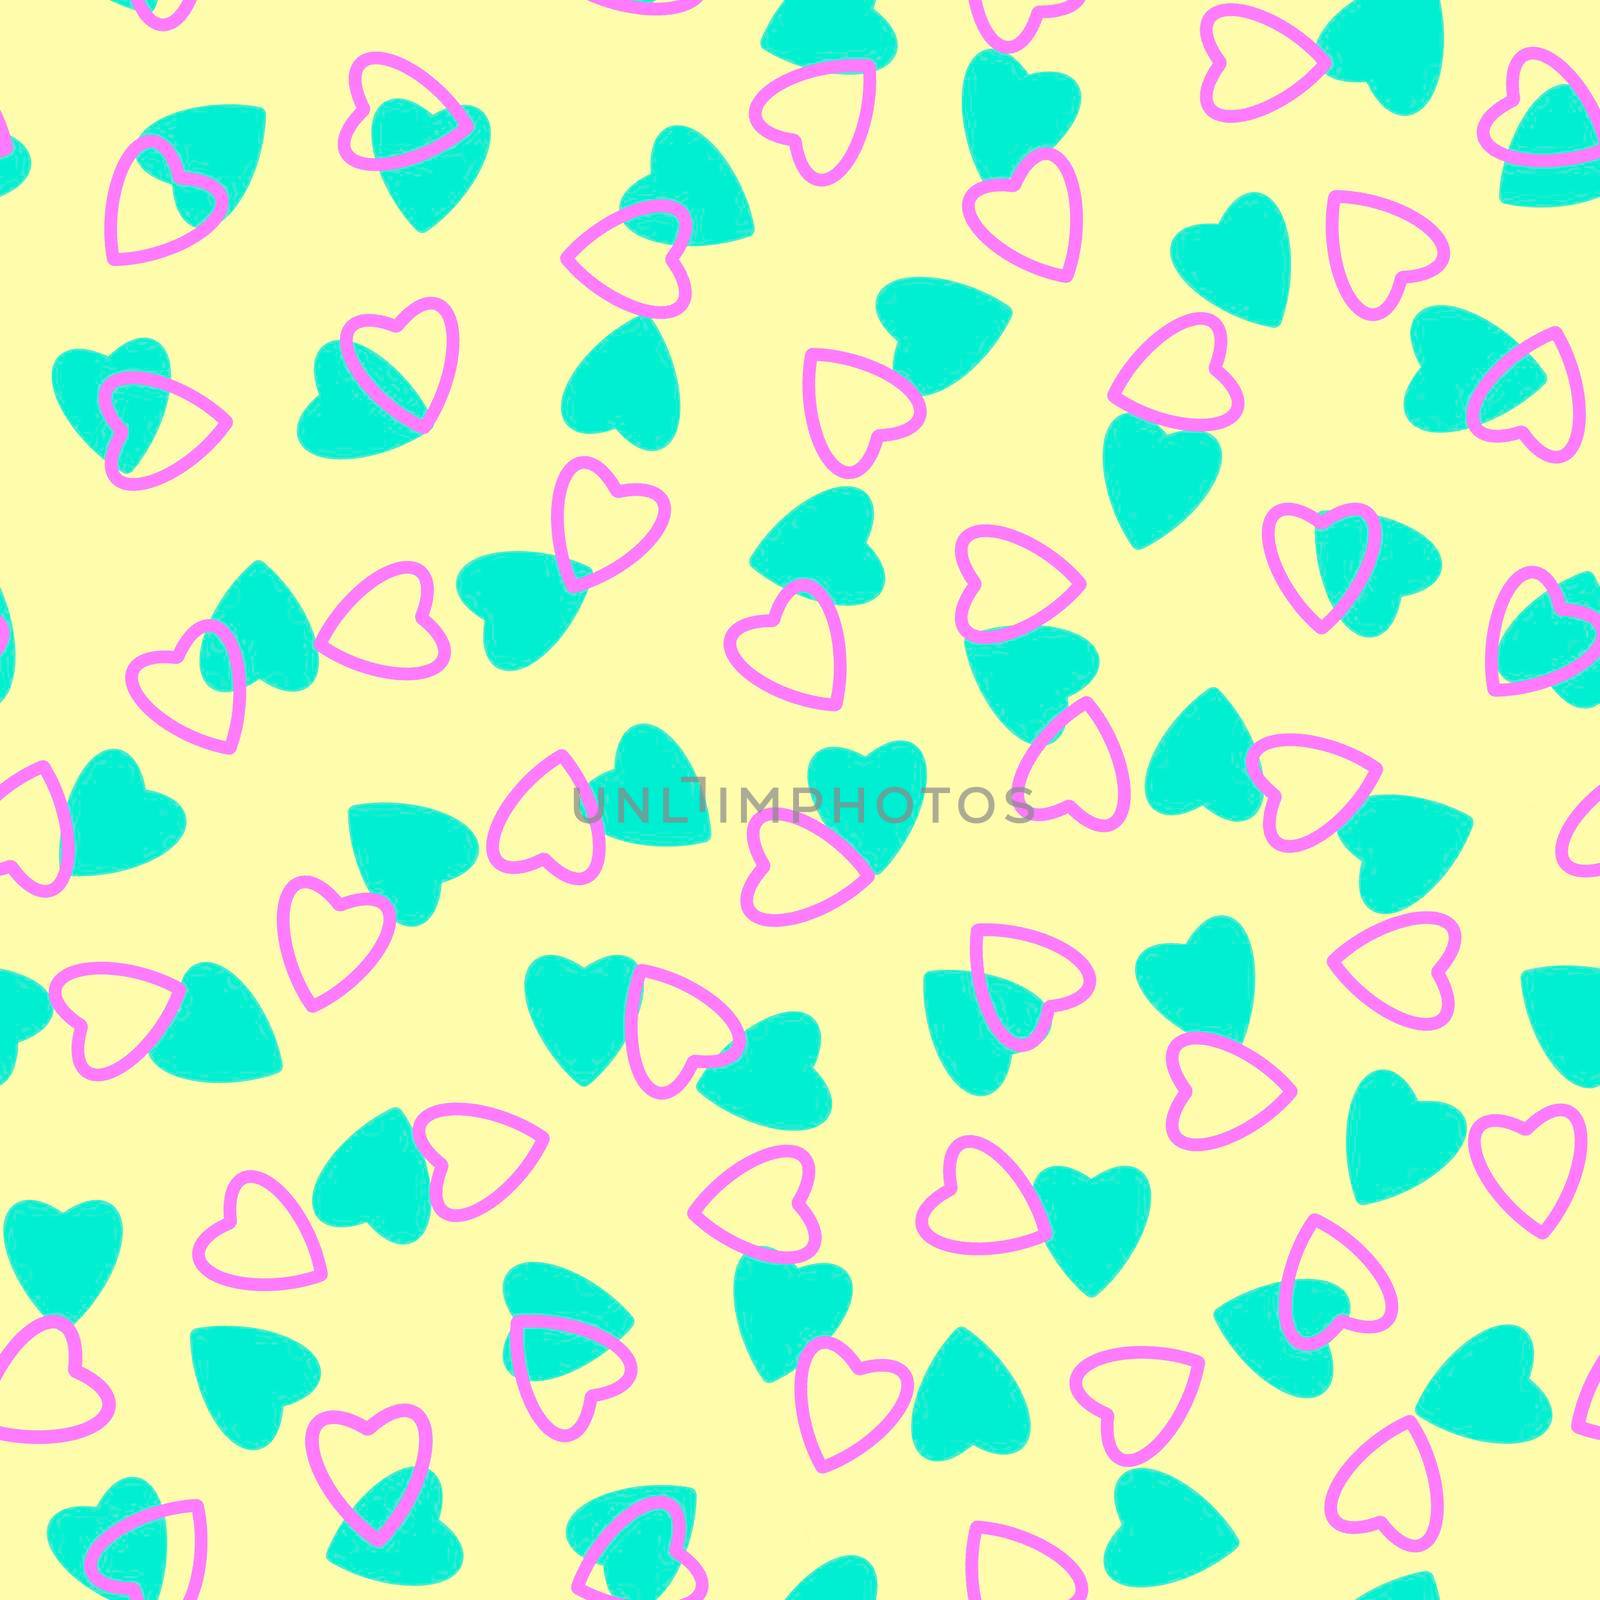 Simple heart seamless pattern,endless chaotic texture made of tiny heart silhouettes.Valentines,mothers day background.Great for Easter,wedding,scrapbook,gift wrapping paper,textile.Lilac,azure,Ivory